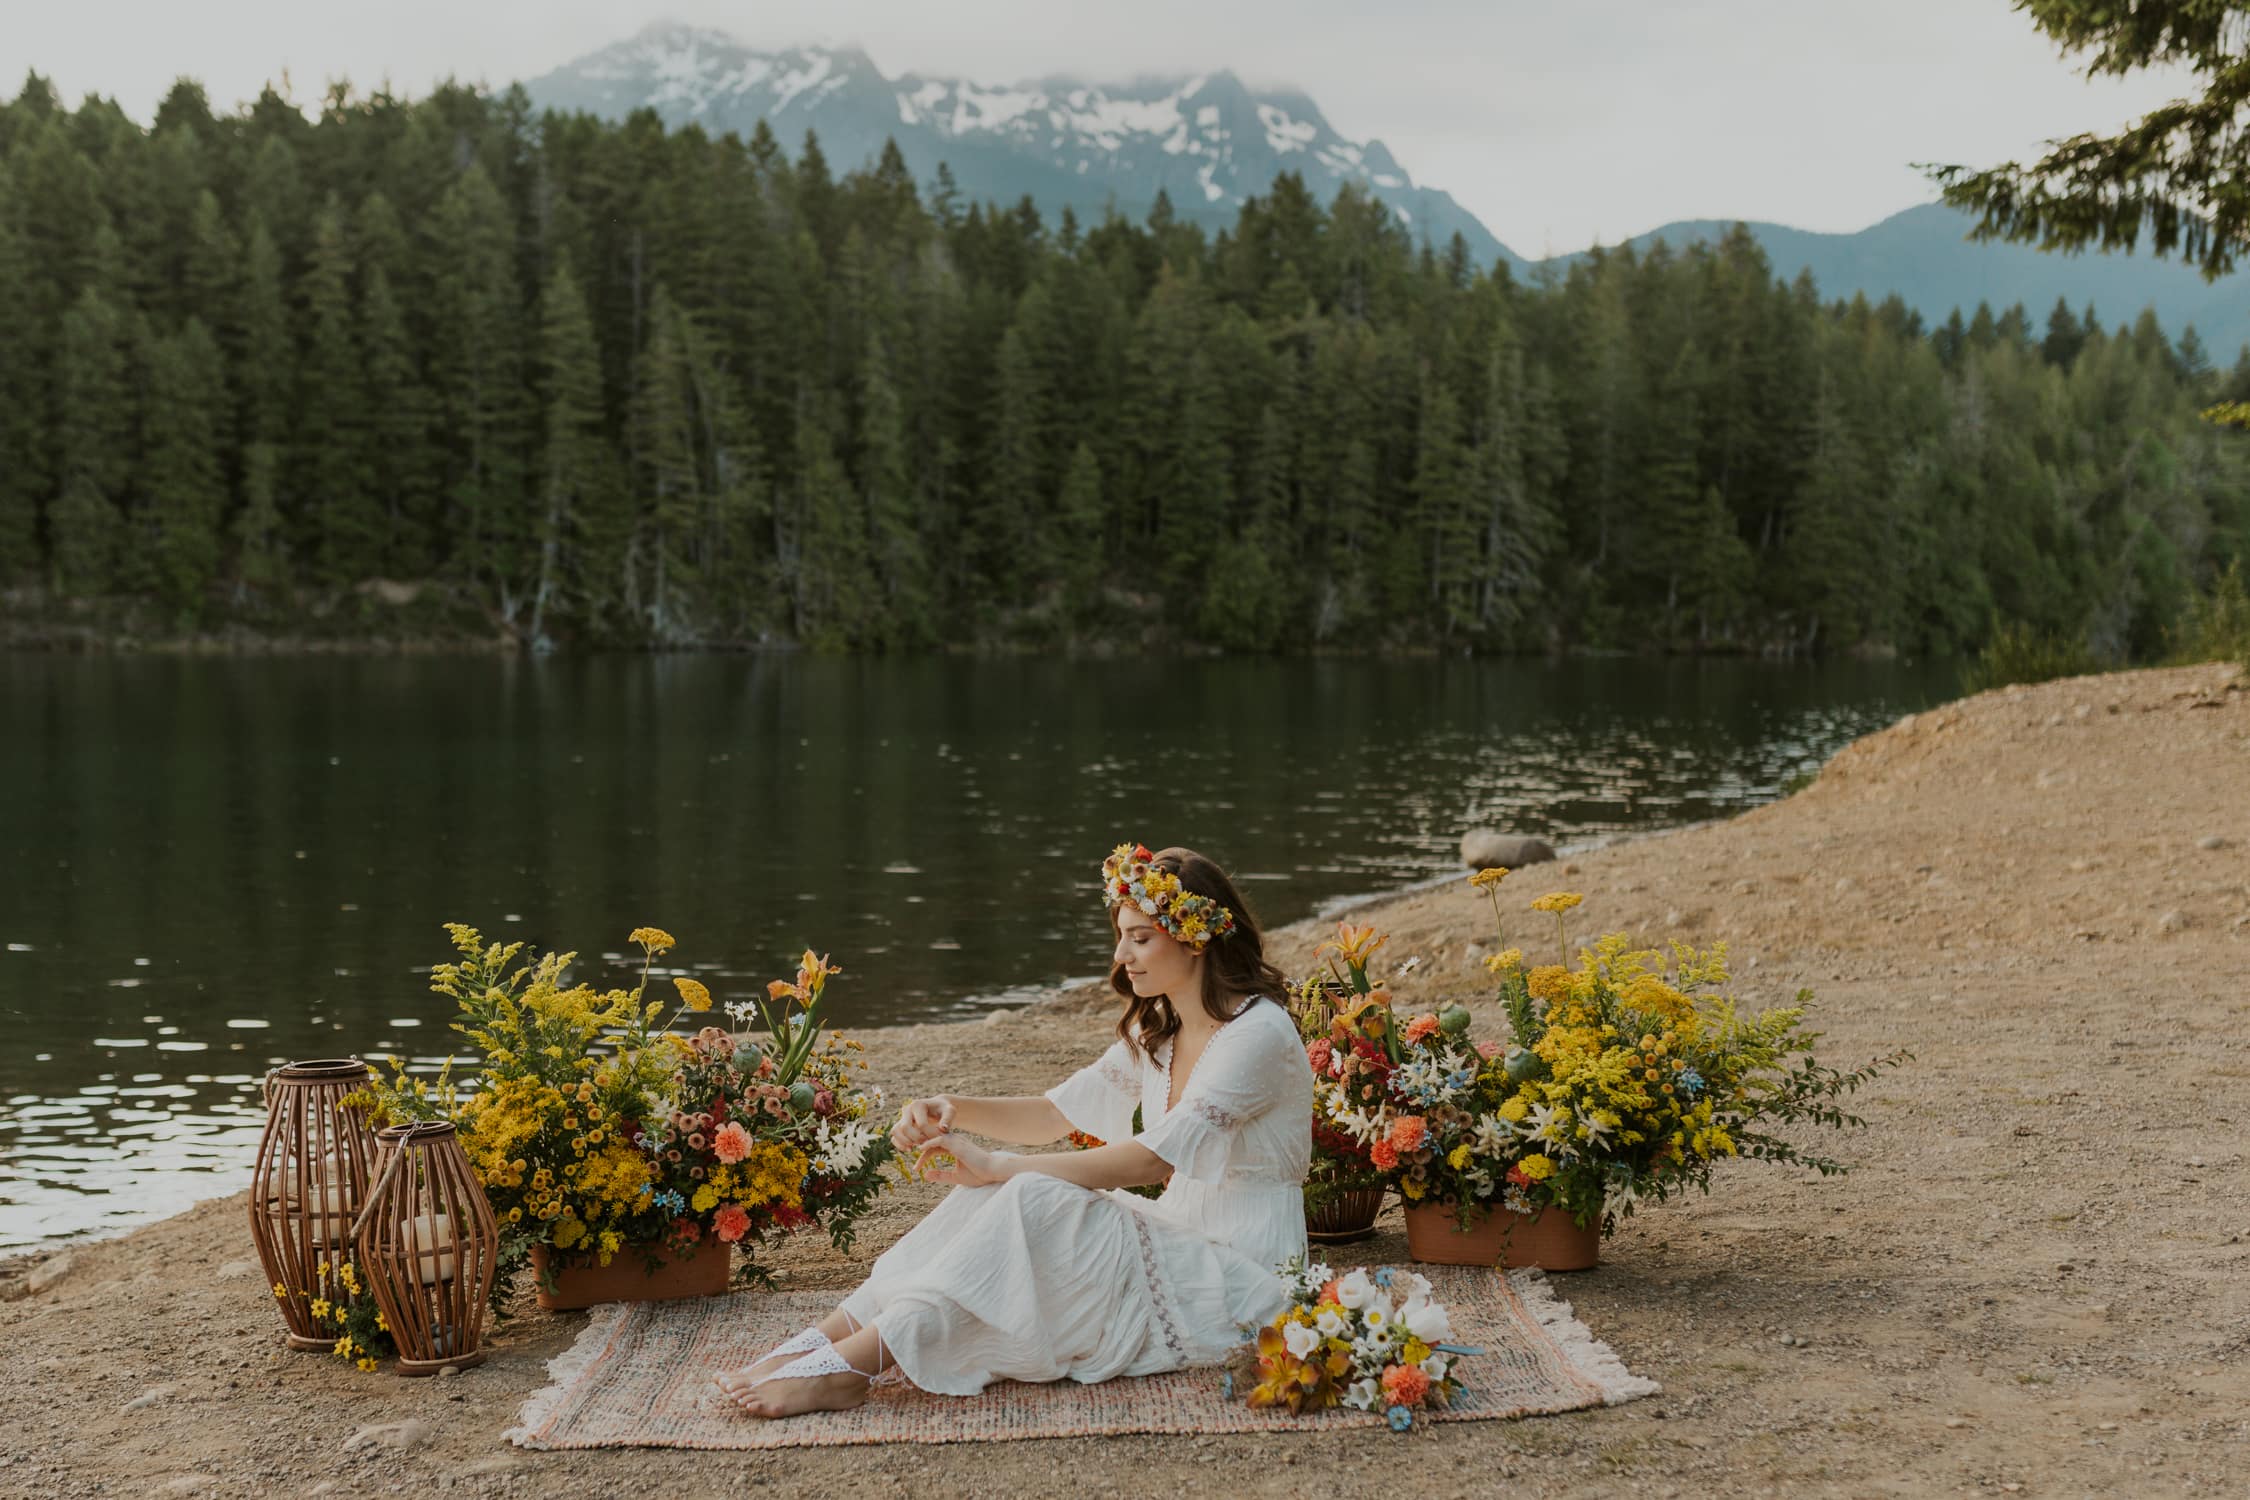 A bride playing with her wedding ring while sitting on the ground next to a lake with lots of yellow flowers in Olympic National Park.